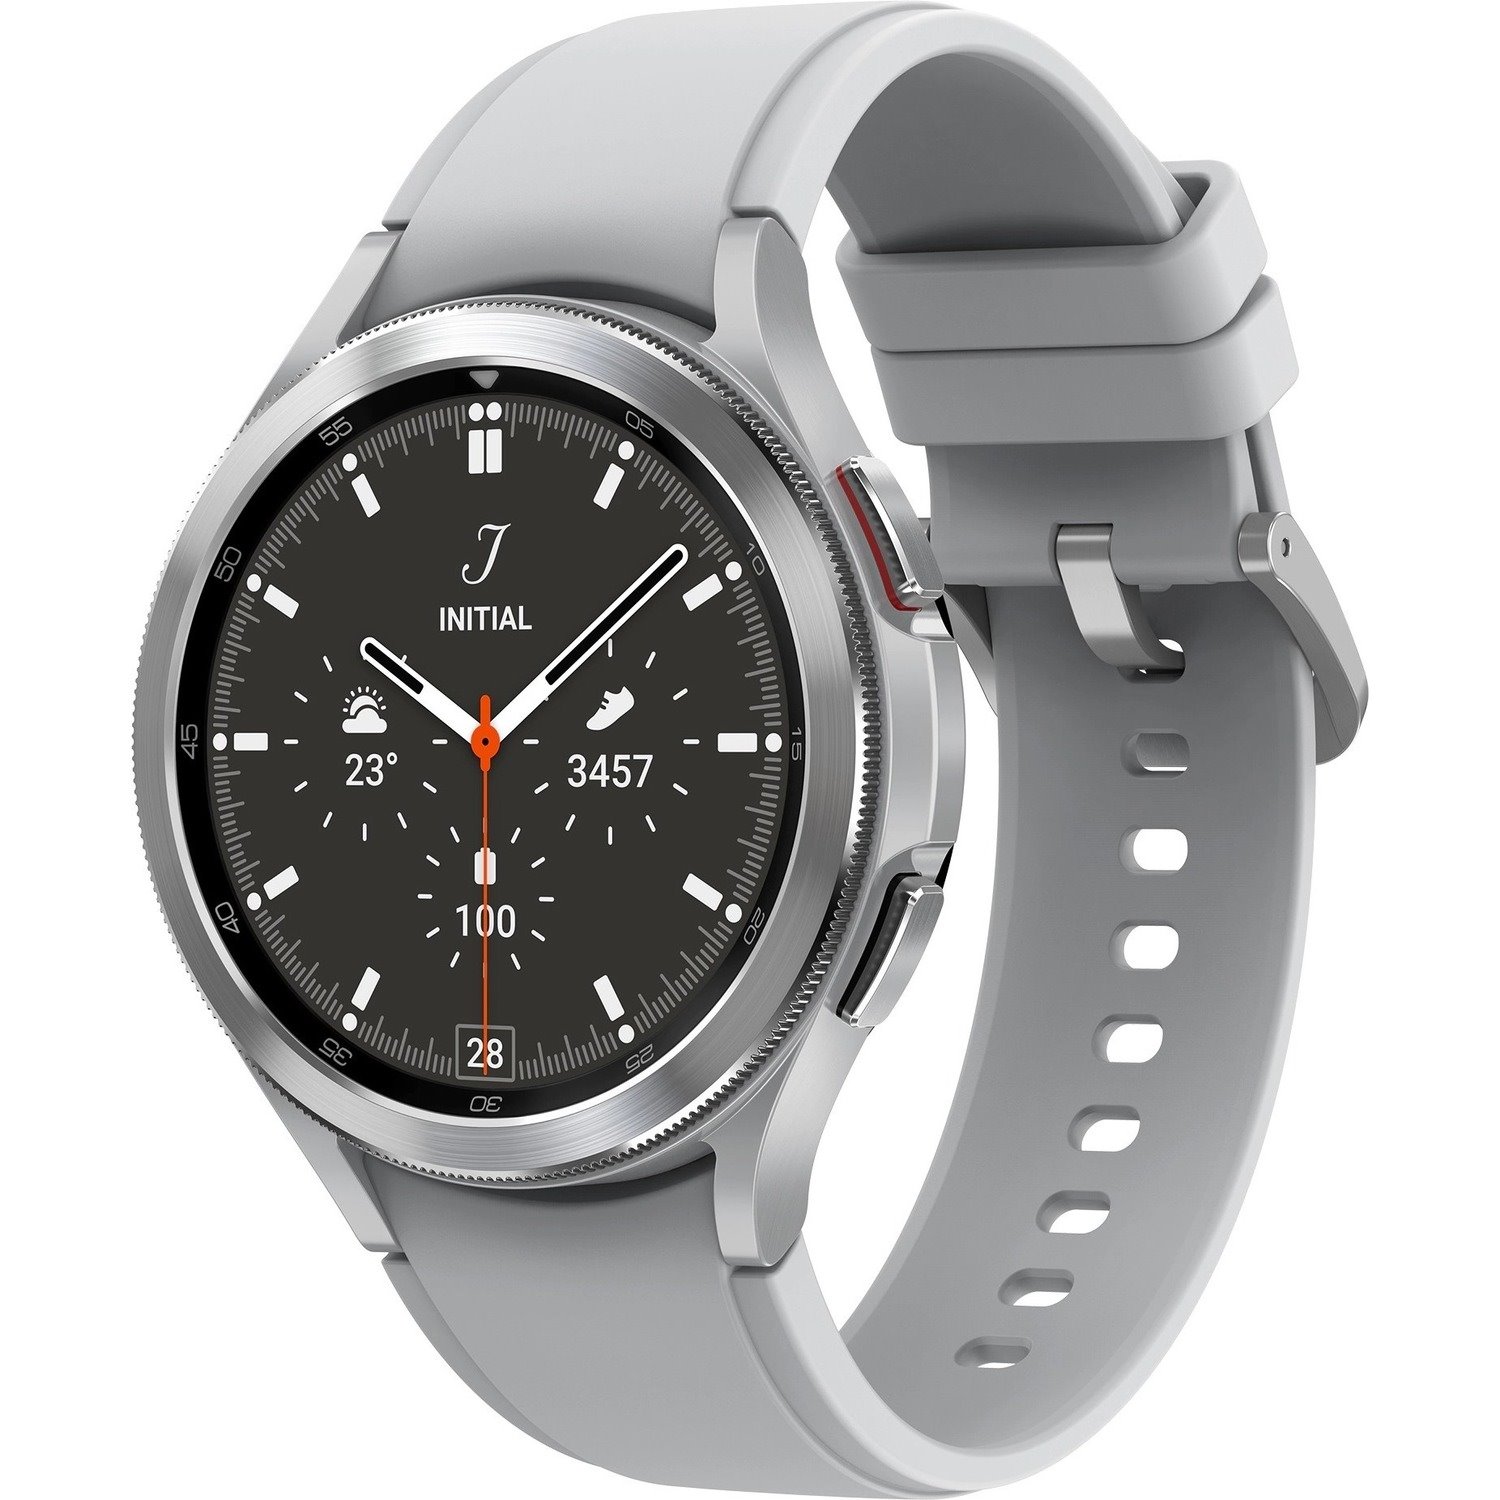 Samsung Galaxy Watch4 Classic SM-R895F Smart Watch - Silver Body Color - Stainless Steel, Glass Body Material - Wireless LAN - 4G